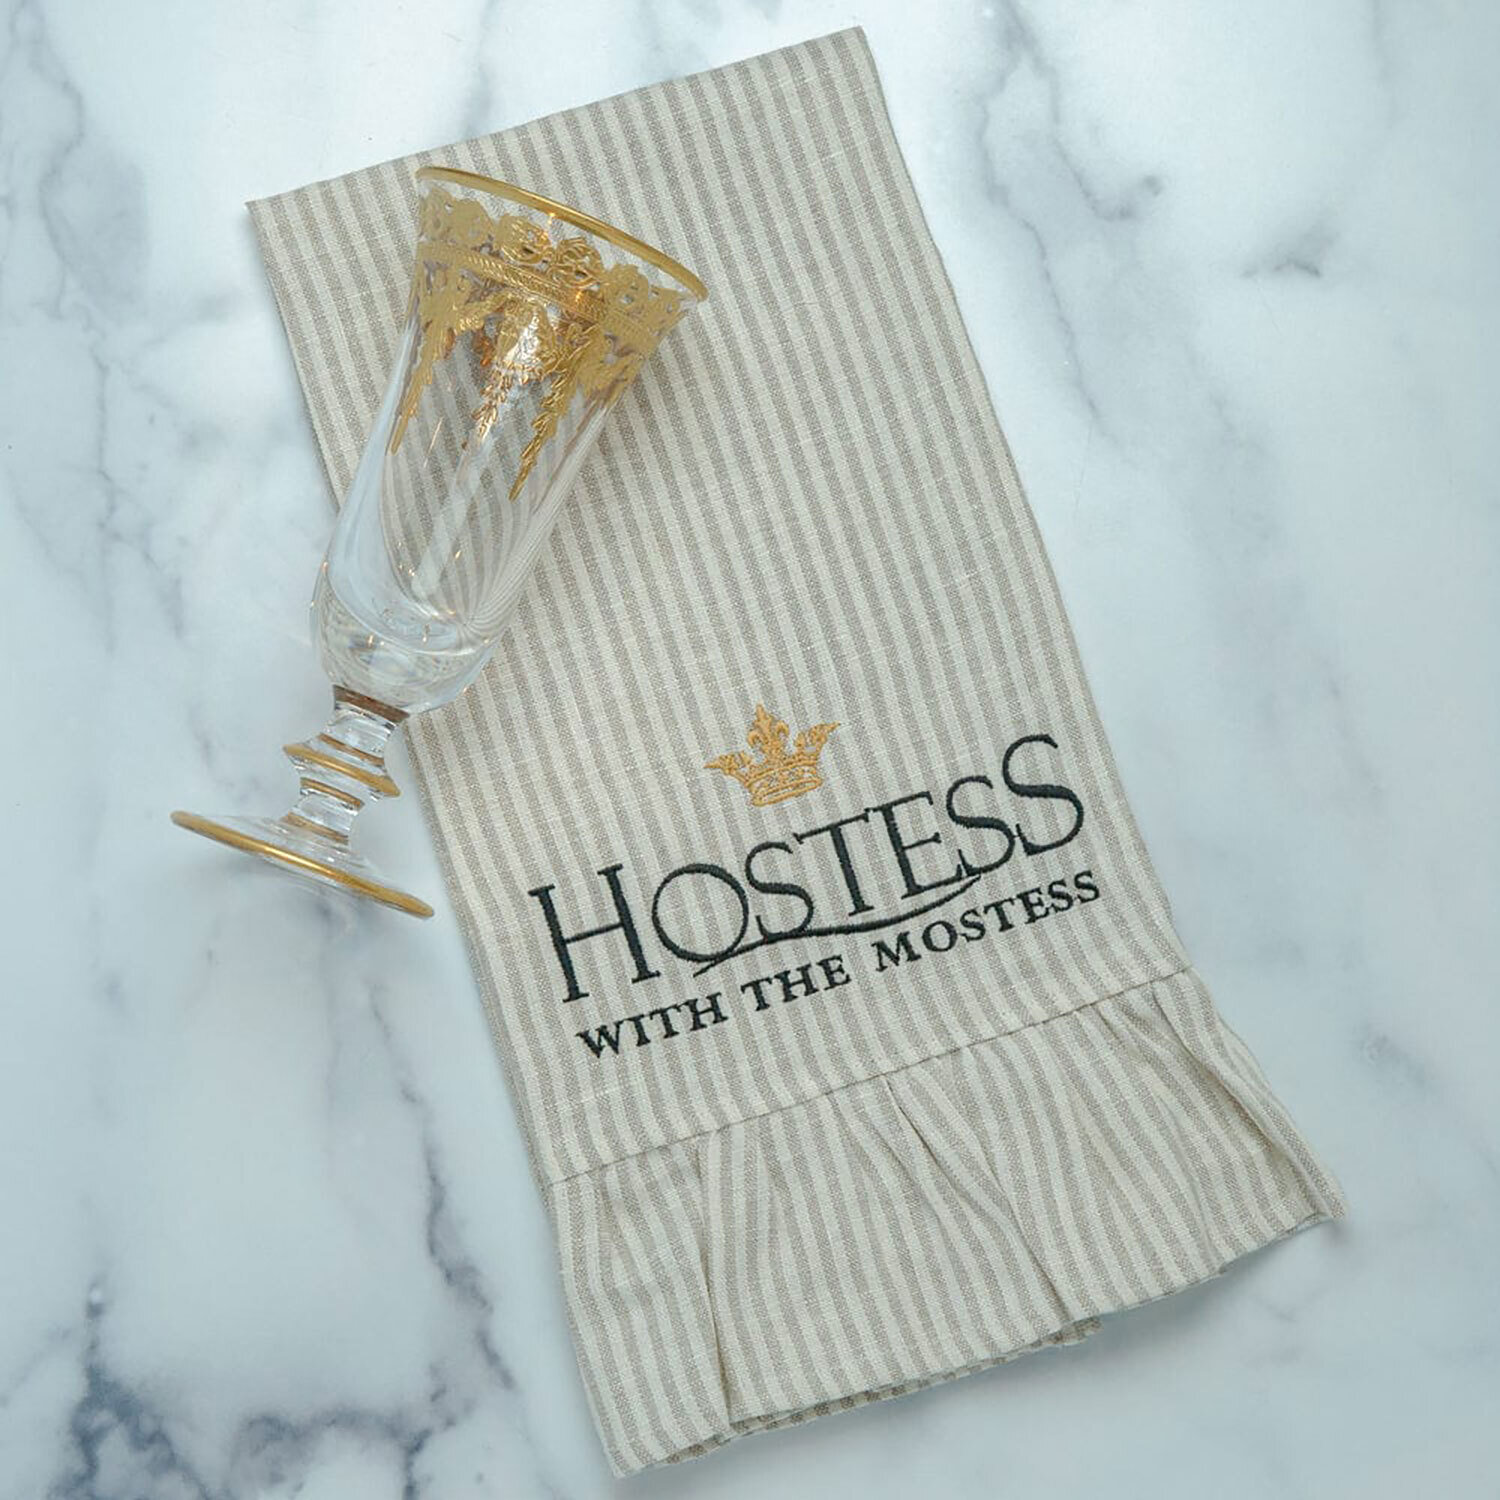 Crown Hostess with the Mostess Linen Towel Ruffle Set of 4 T755